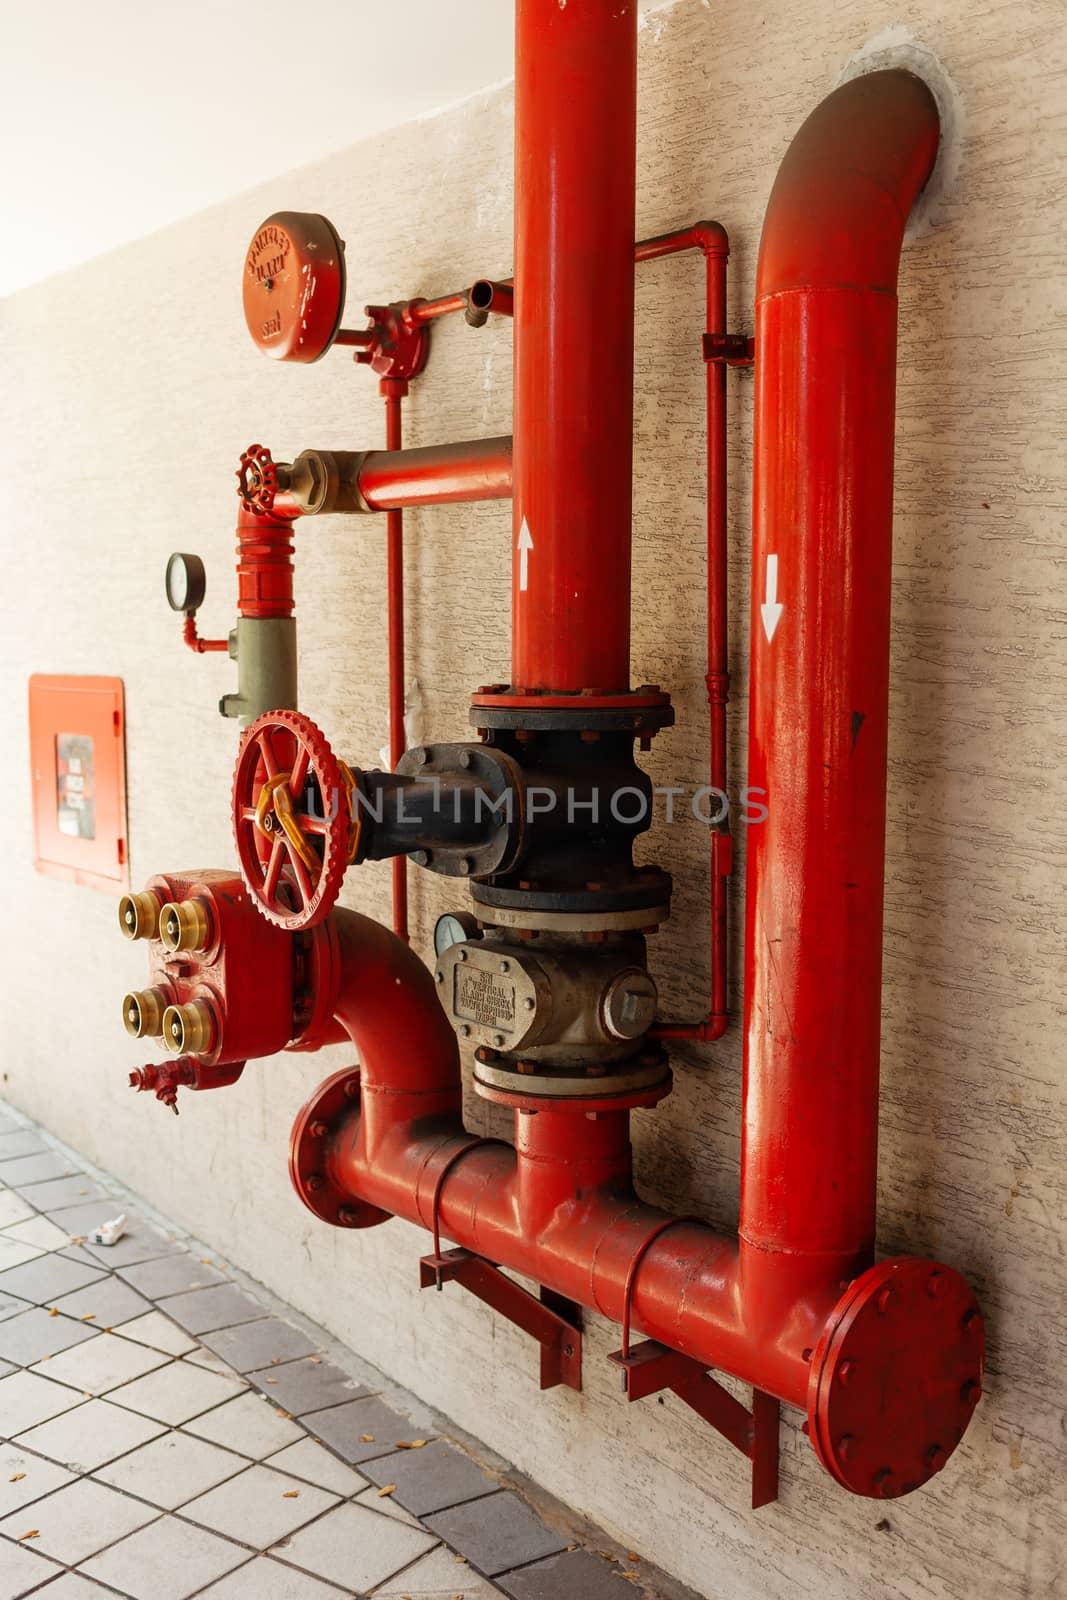 Red pipes on wall. Sprinkler alarm. Outdoor industrial equipment, Kuala Lumpur, Malaysia.